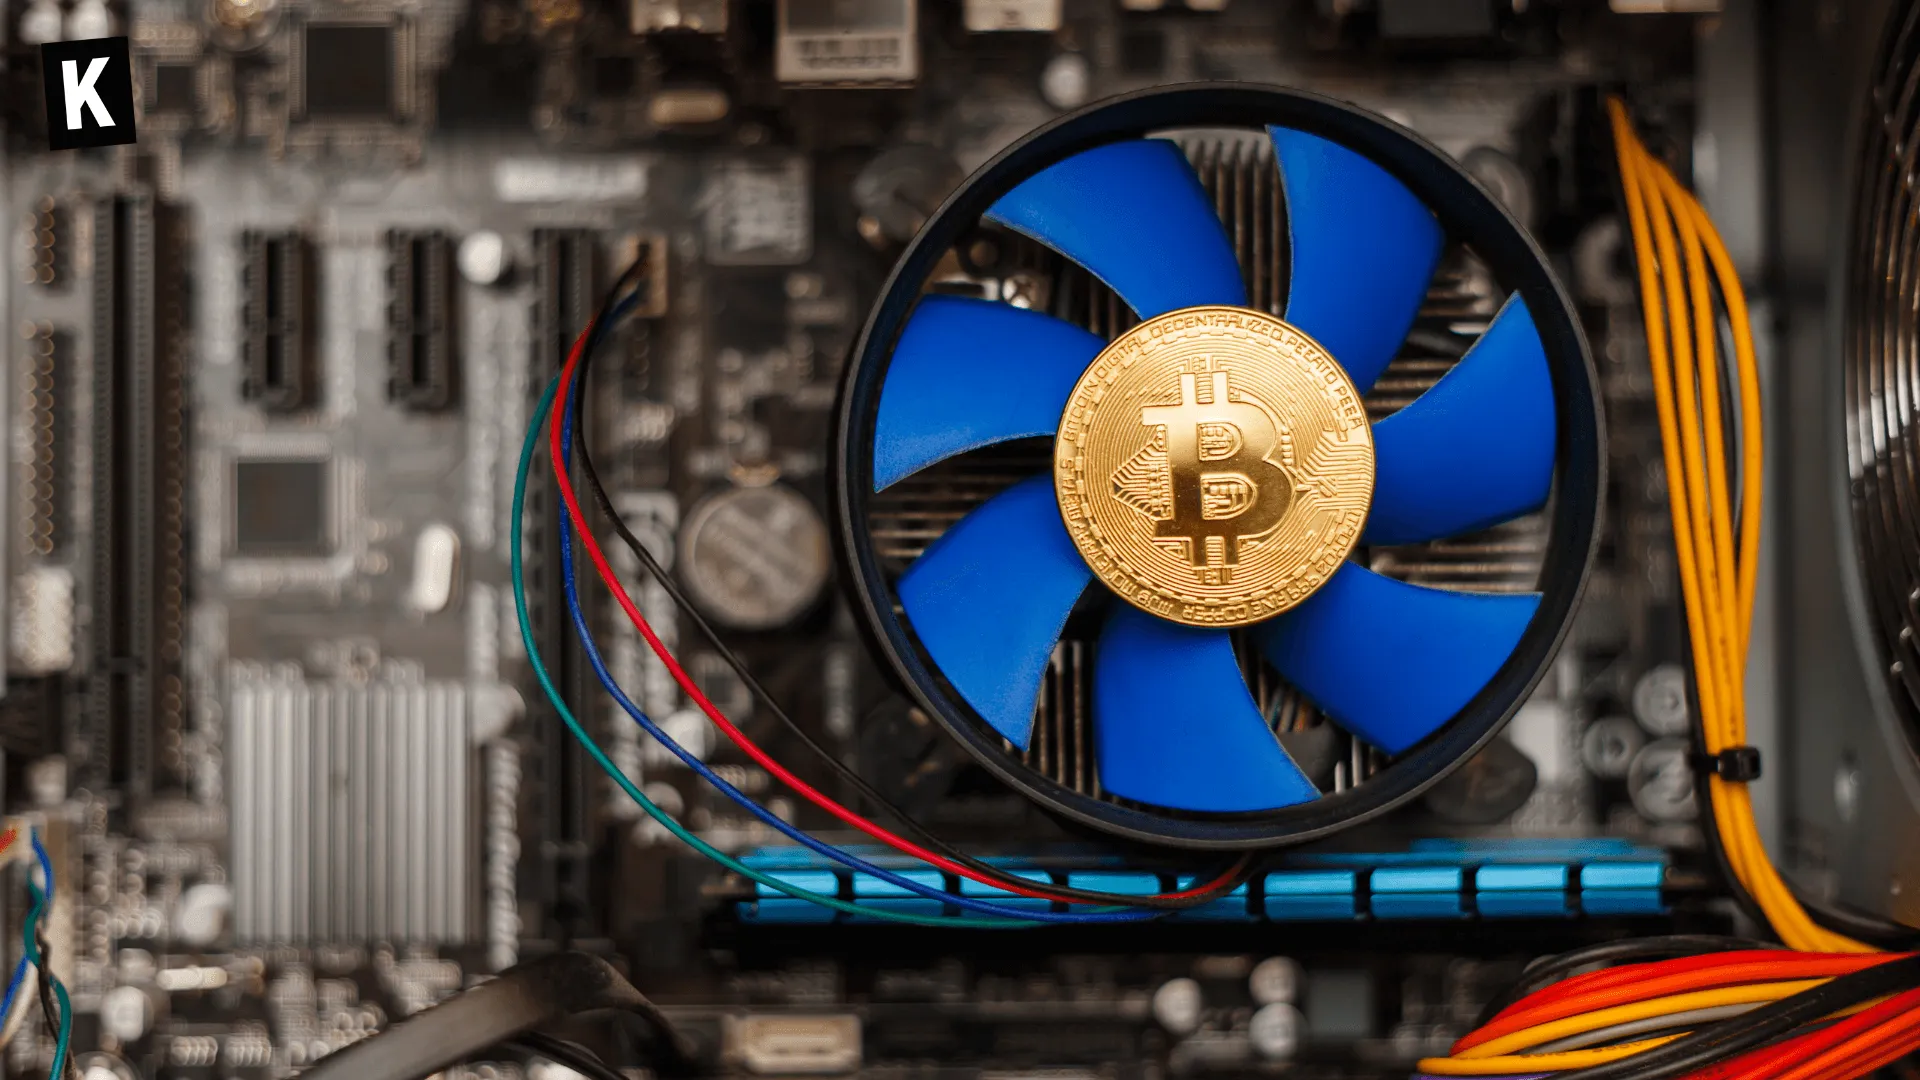 A Bitcoin on top of a computer fan, to symbolize mining Bitcoin